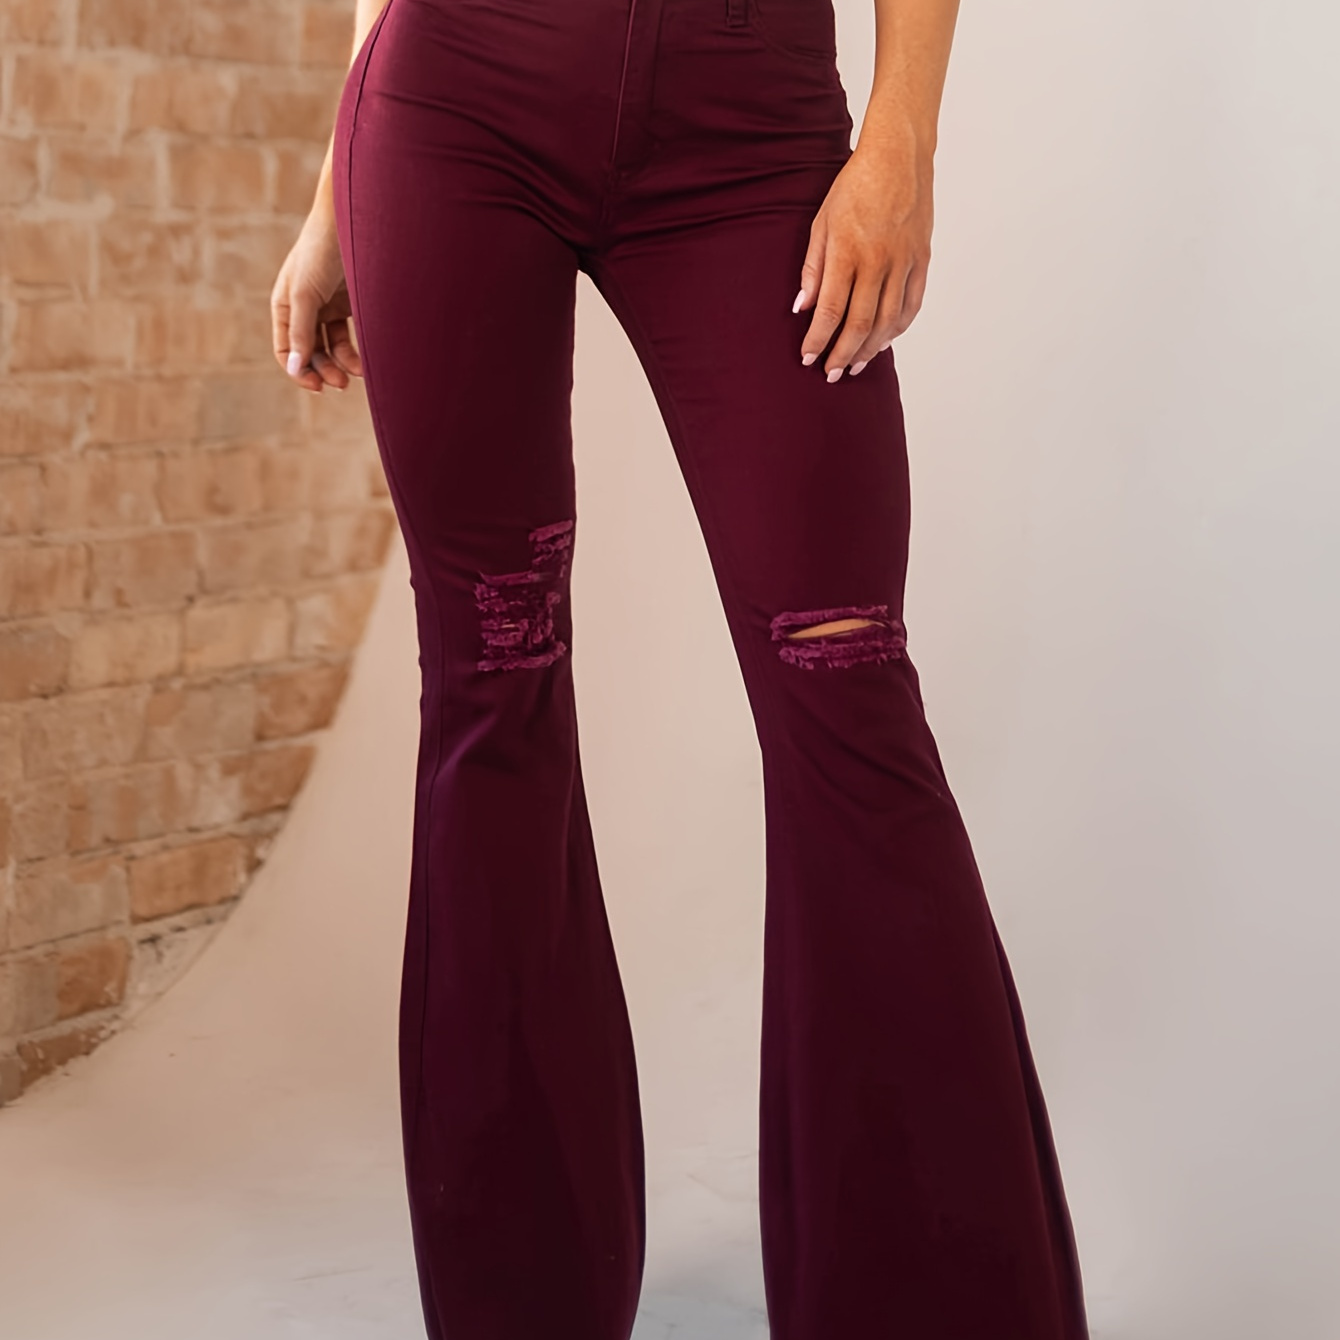 

Burgundy Ripped Holes Bell Bottom Jeans, Mid-waisted Trim Loose Stretchy Flare Jeans, Women's Denim Jeans & Clothing